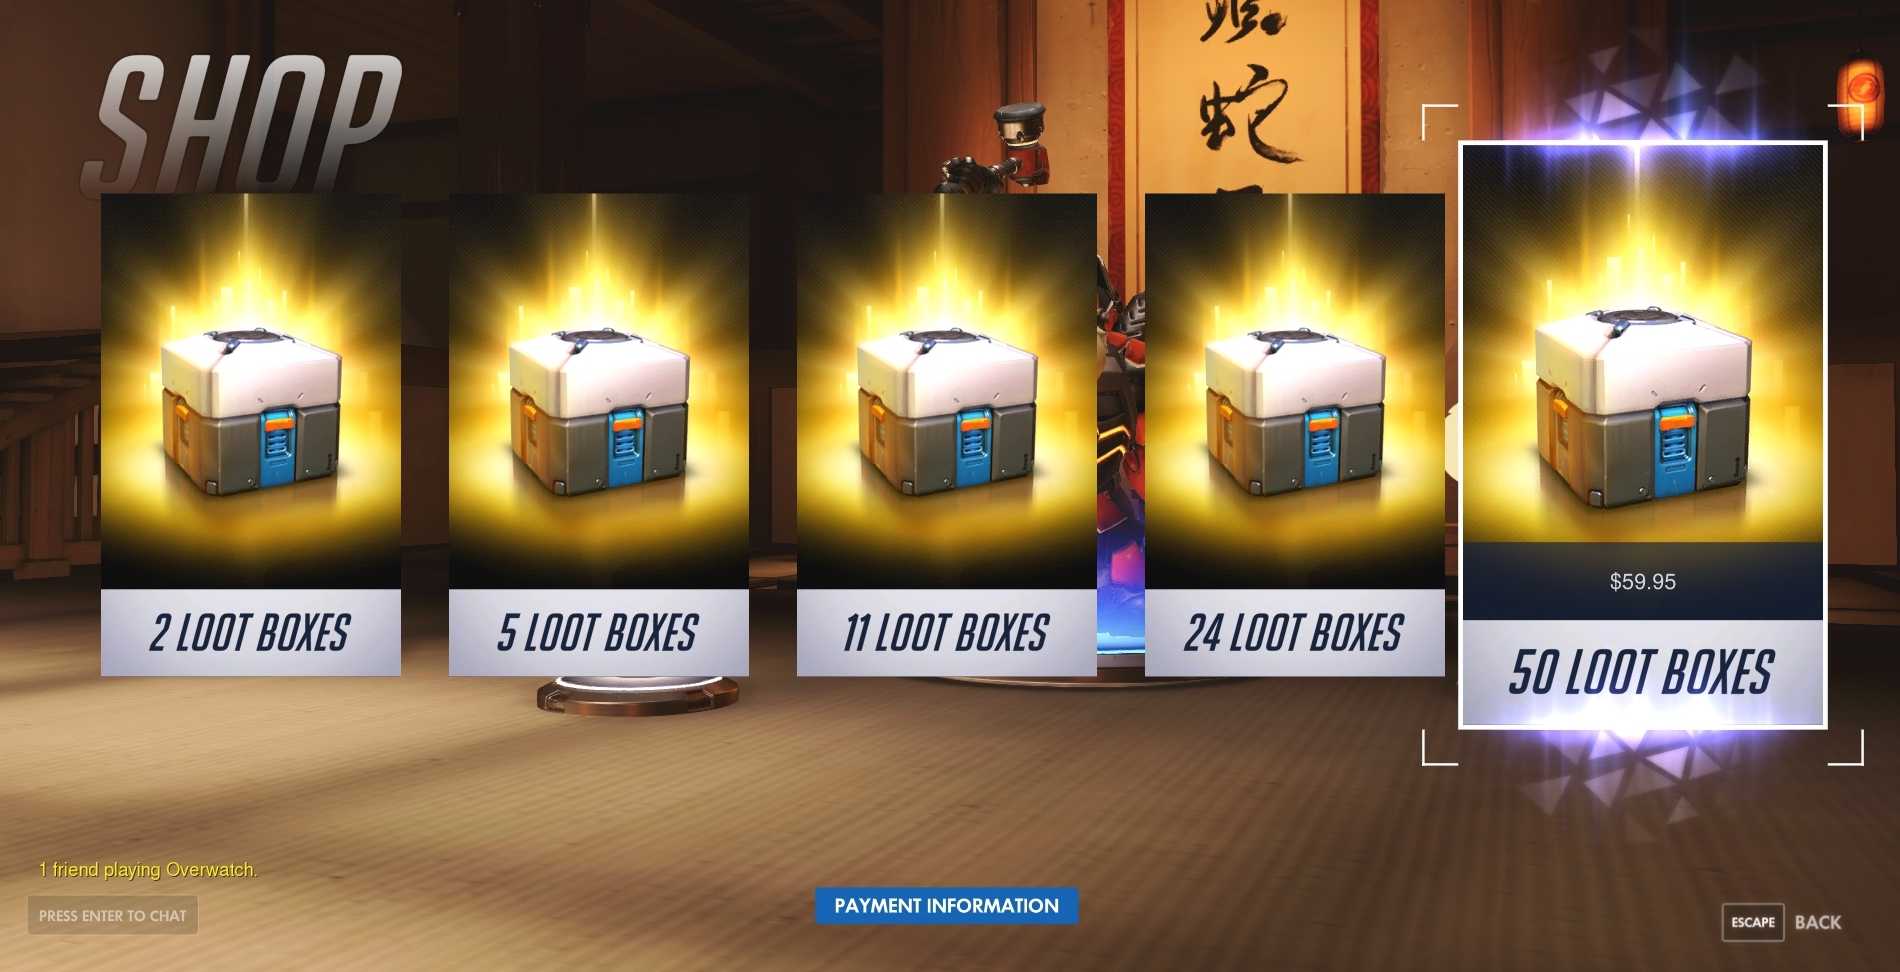 Loot boxes are an unfortunate side-effect of modern gaming practices